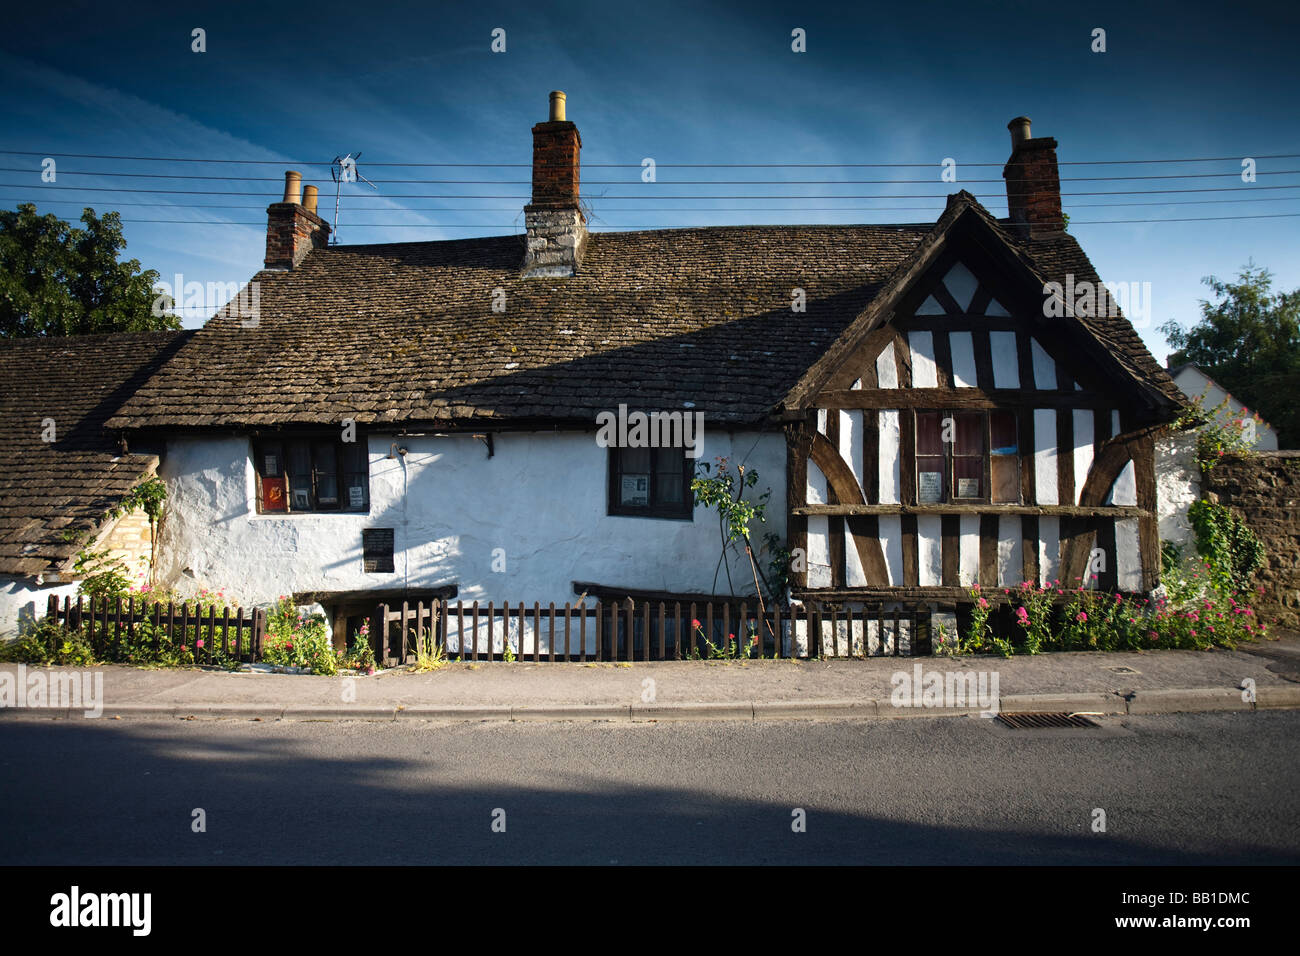 bule endnu engang Pump The haunted Ram Inn, Wotton-under-Edge, one of the most haunted buildings  in England Stock Photo - Alamy